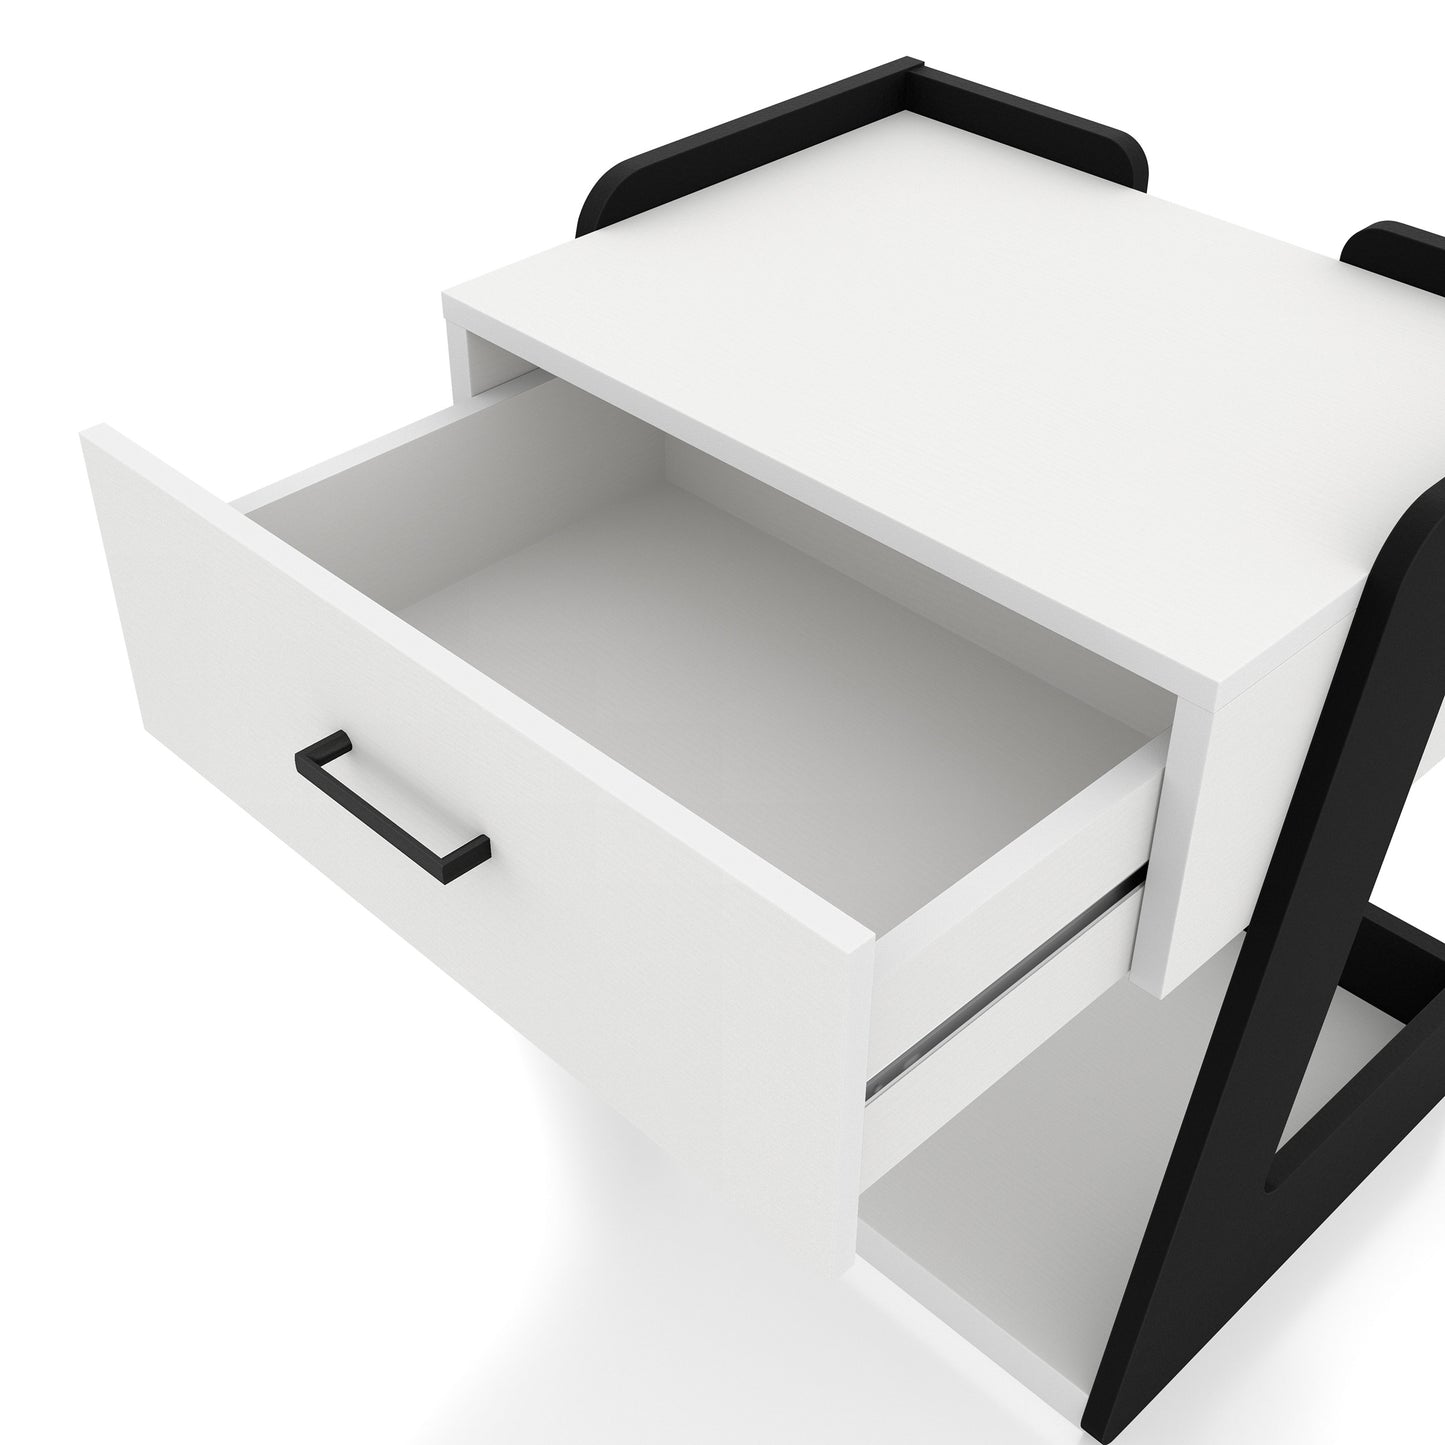 Left angled close-up view of a contemporary white and black one-drawer side table with a shelf and drawer open on a white background